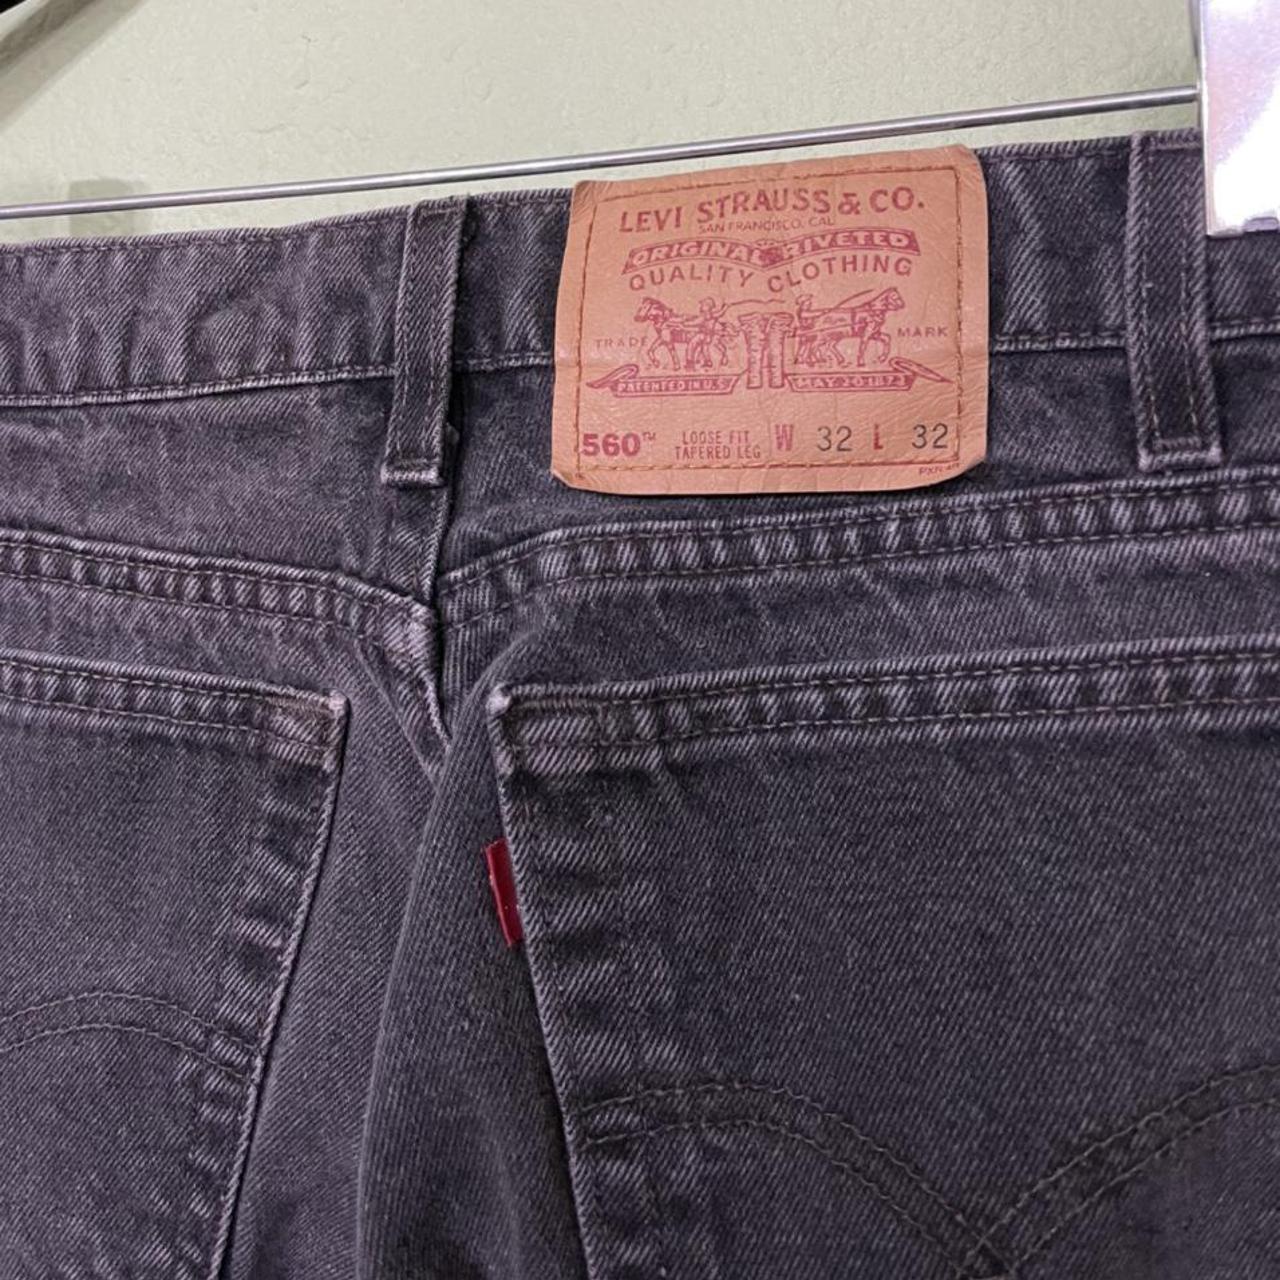 Product Image 3 - Vintage Levi’s 560’s in all